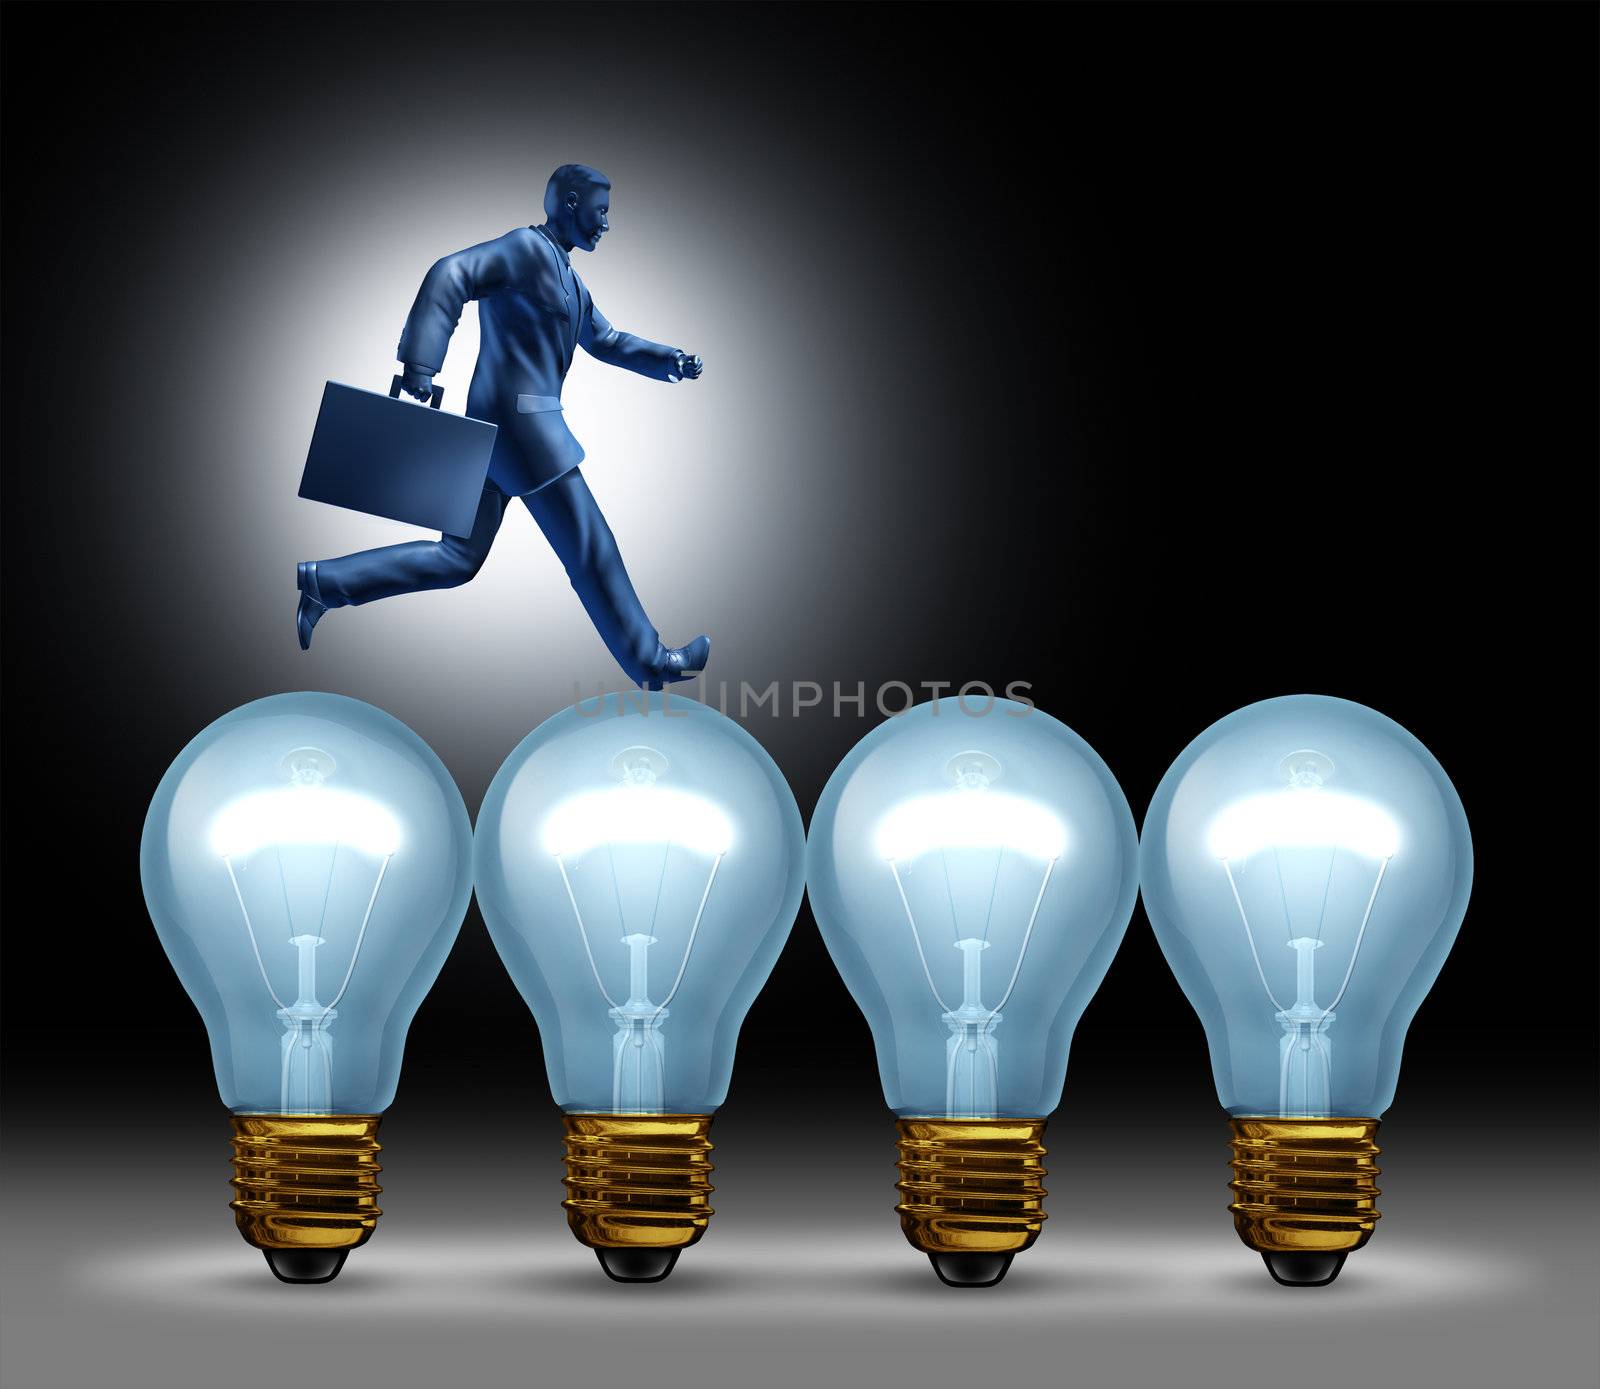 Creative bridge business concept with a man in a suit running on lightbulbs using ideas to move forward with innovation and wealth on a black background.